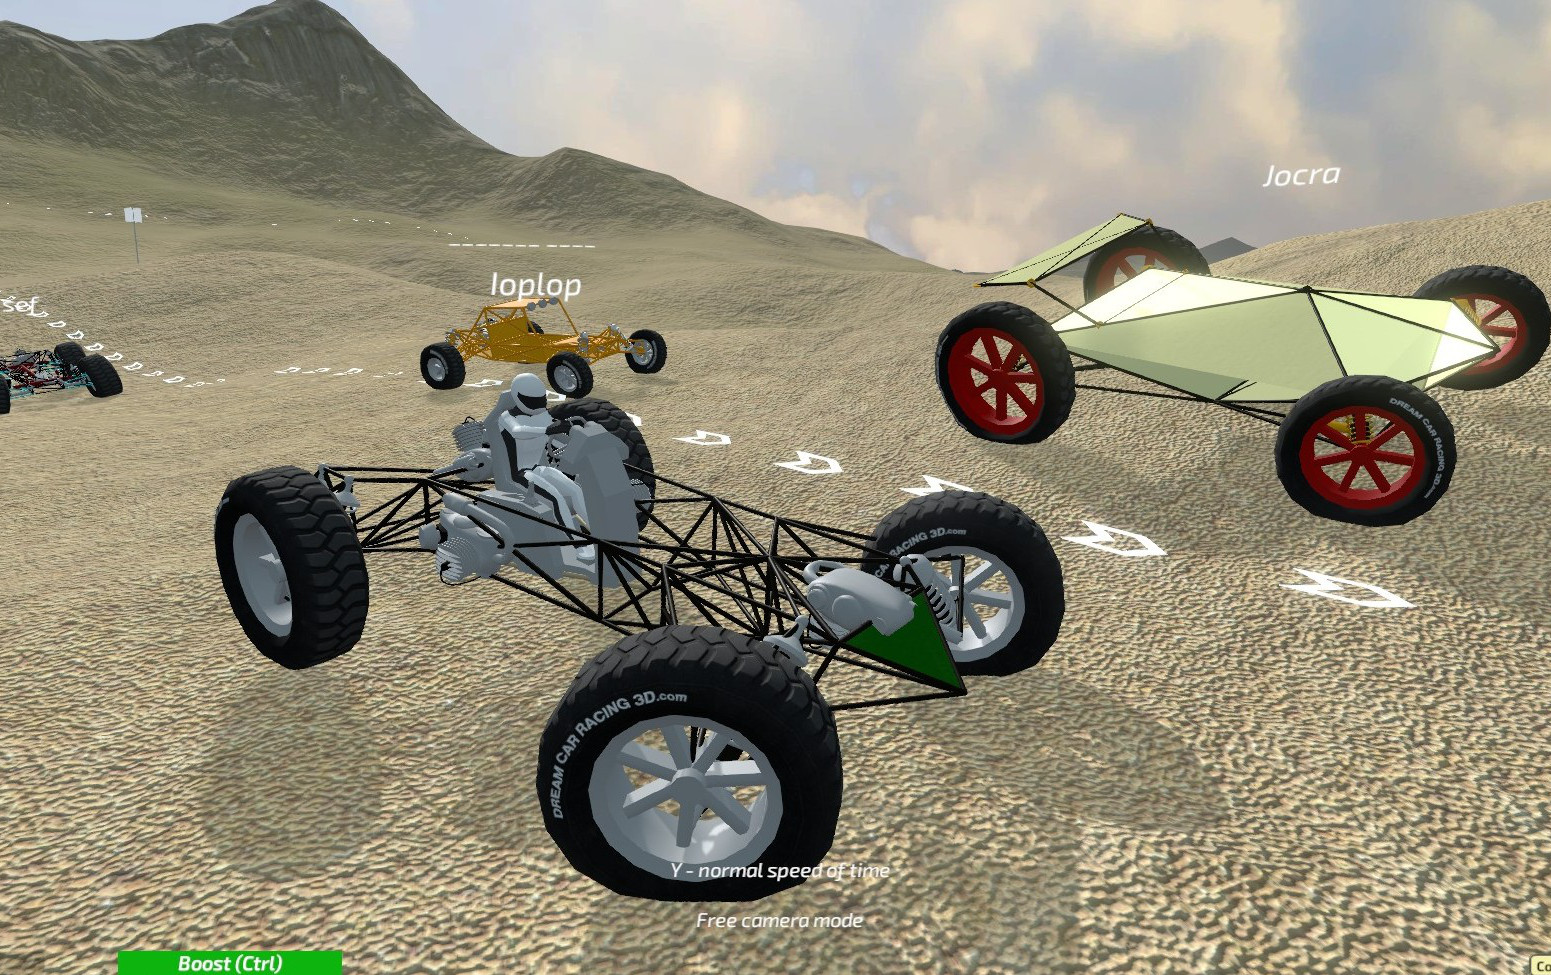 Dream Car Builder is a game where you can design your own car and race it. 